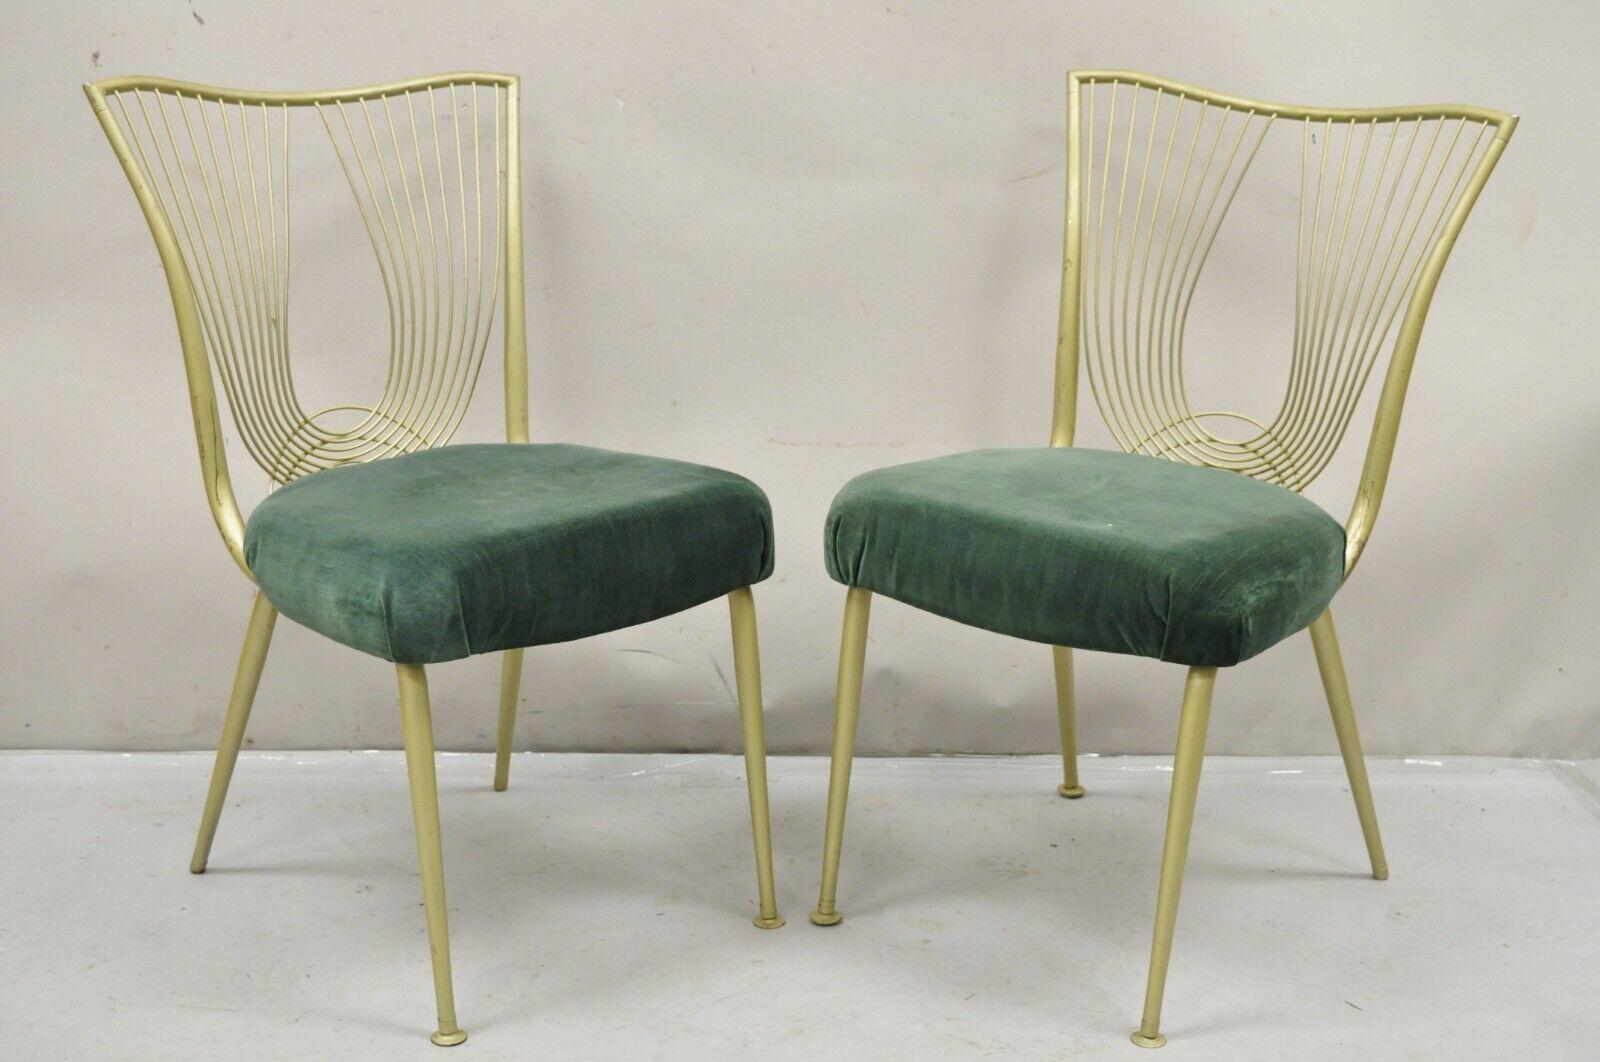 Vintage Hollywood Regency Sculptural Metal Brass Tone Kitchen Dining Chairs by Virtue Bros. Mfg - Set of 4. Item features sculptural metal frames, gold/ brass painted finish, original label, unique vintage set. Circa  Mid 20th Century. Measurements: